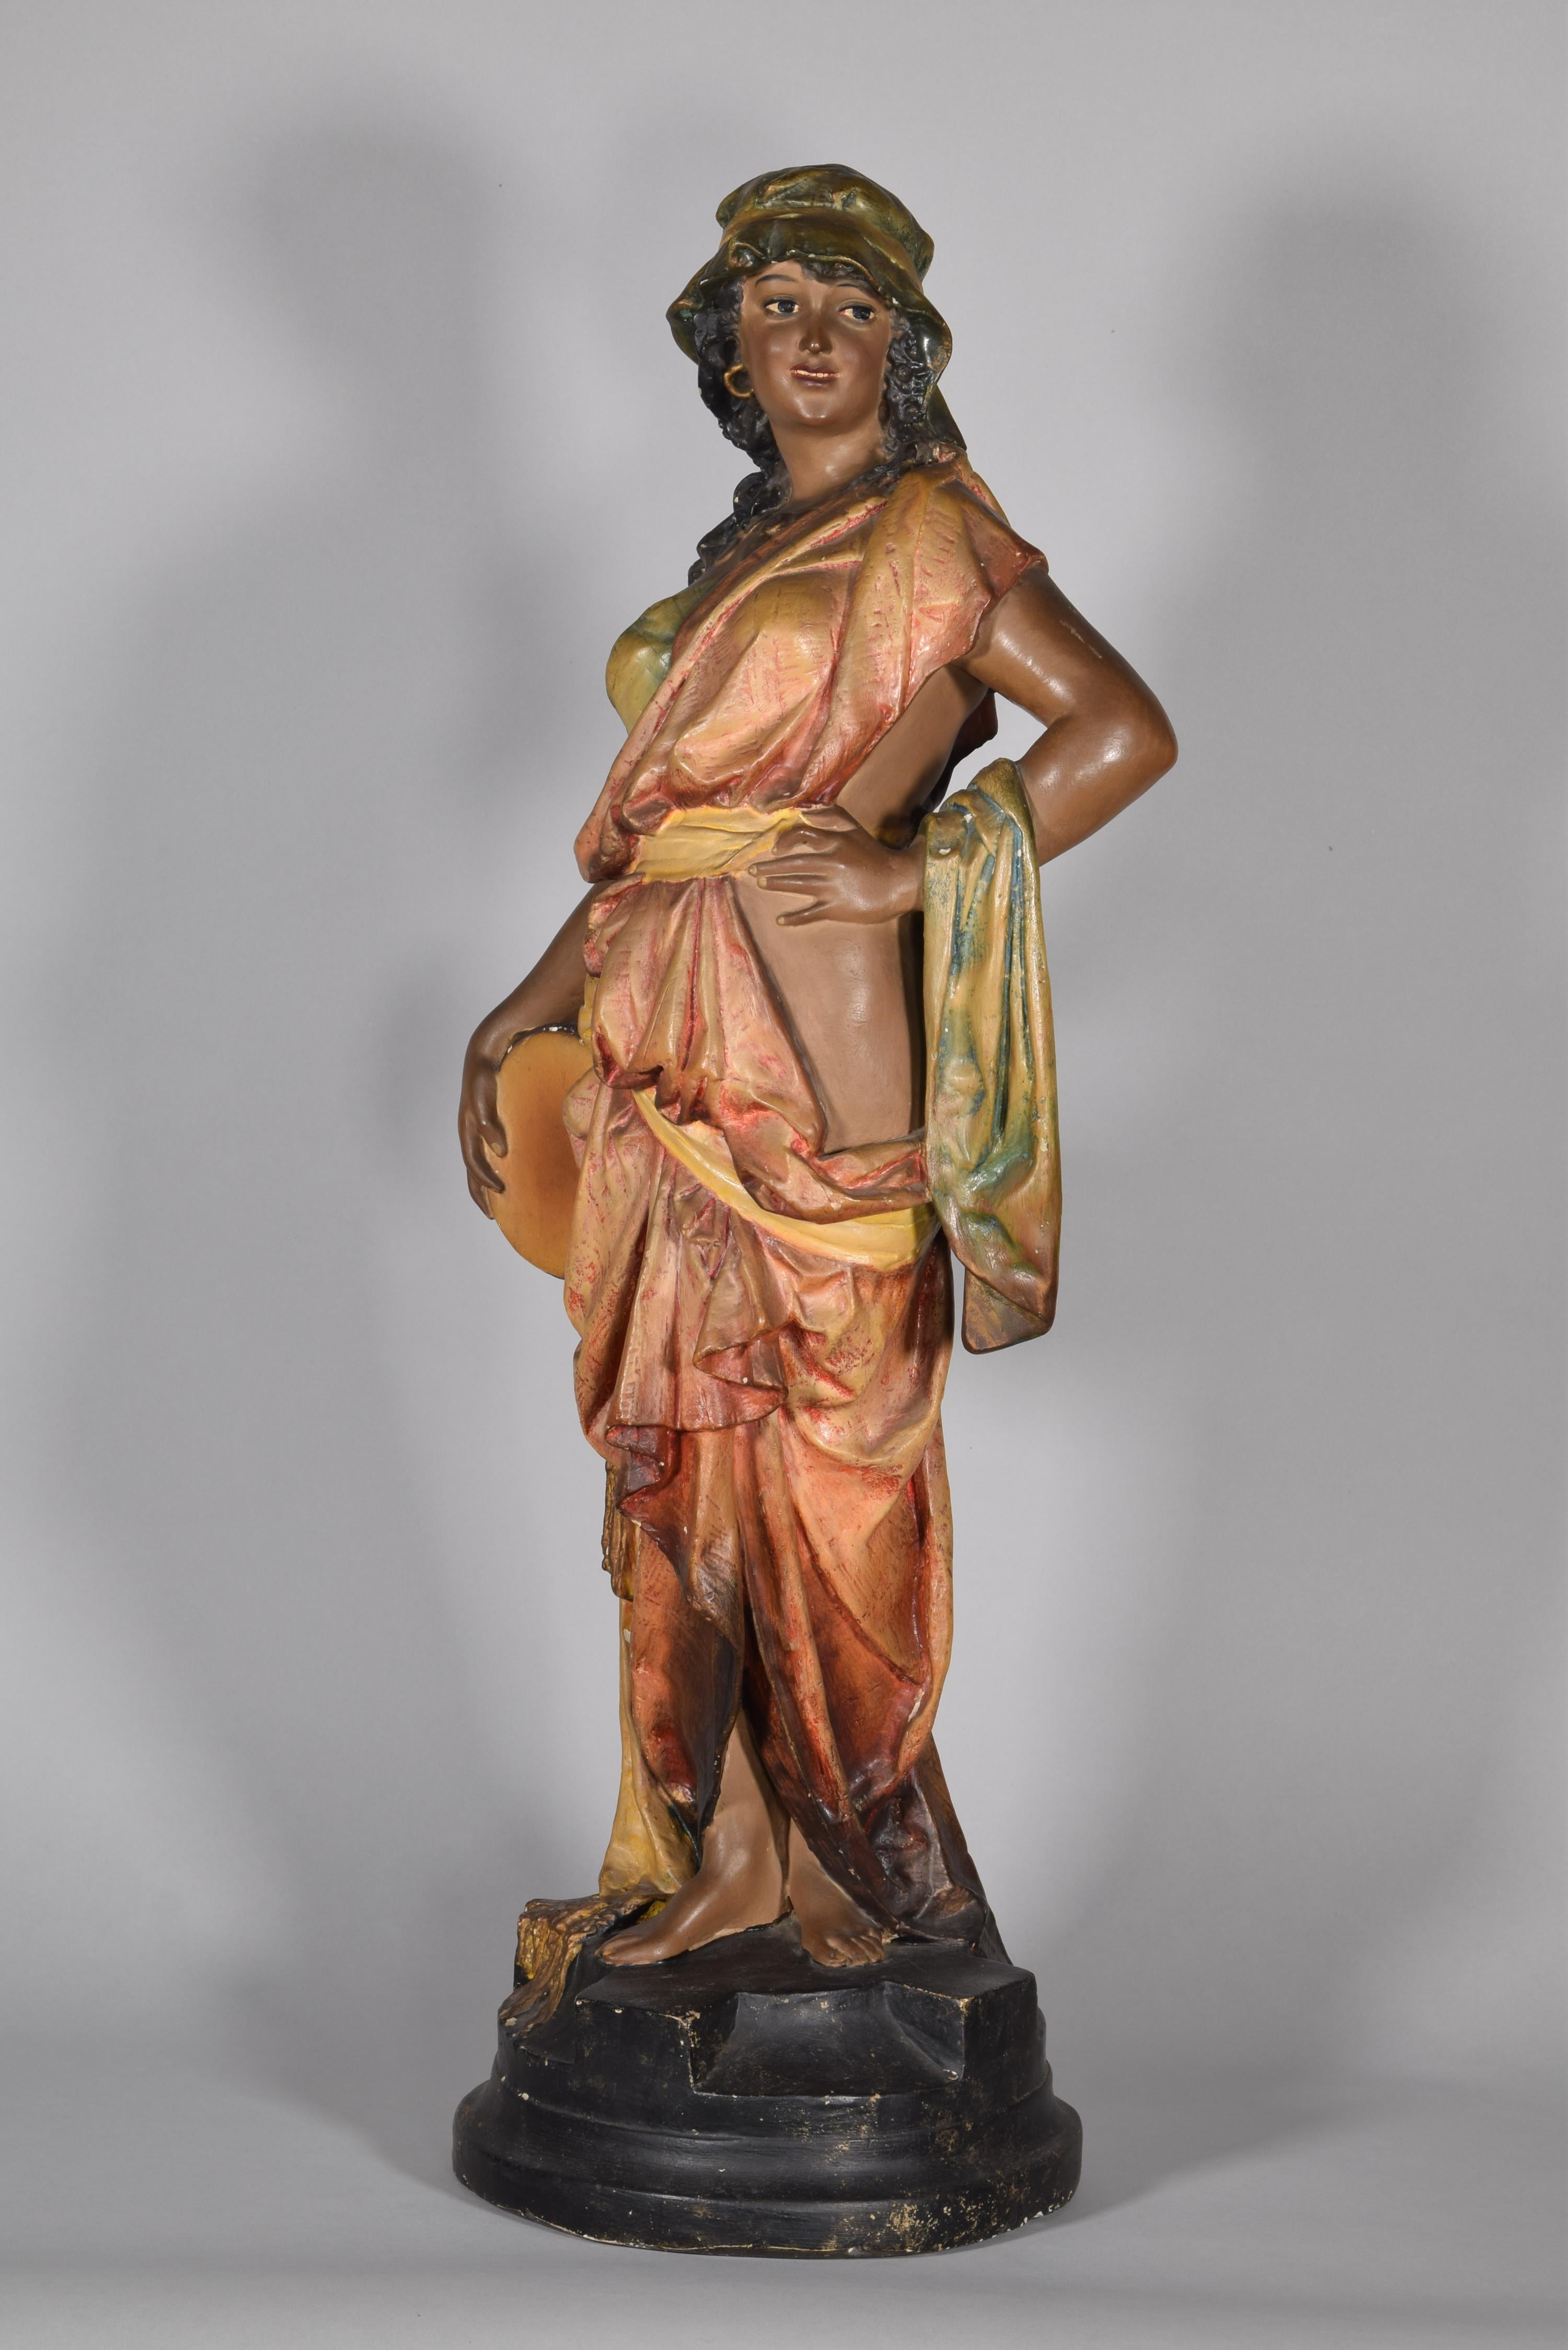 Orientalist sculpture. Polychrome plaster, 19th century.
Female figure made in polychrome plaster that shows a young woman standing on a circular base, dressed in clothing that was considered exotic at the time, with a suggestive pose and a